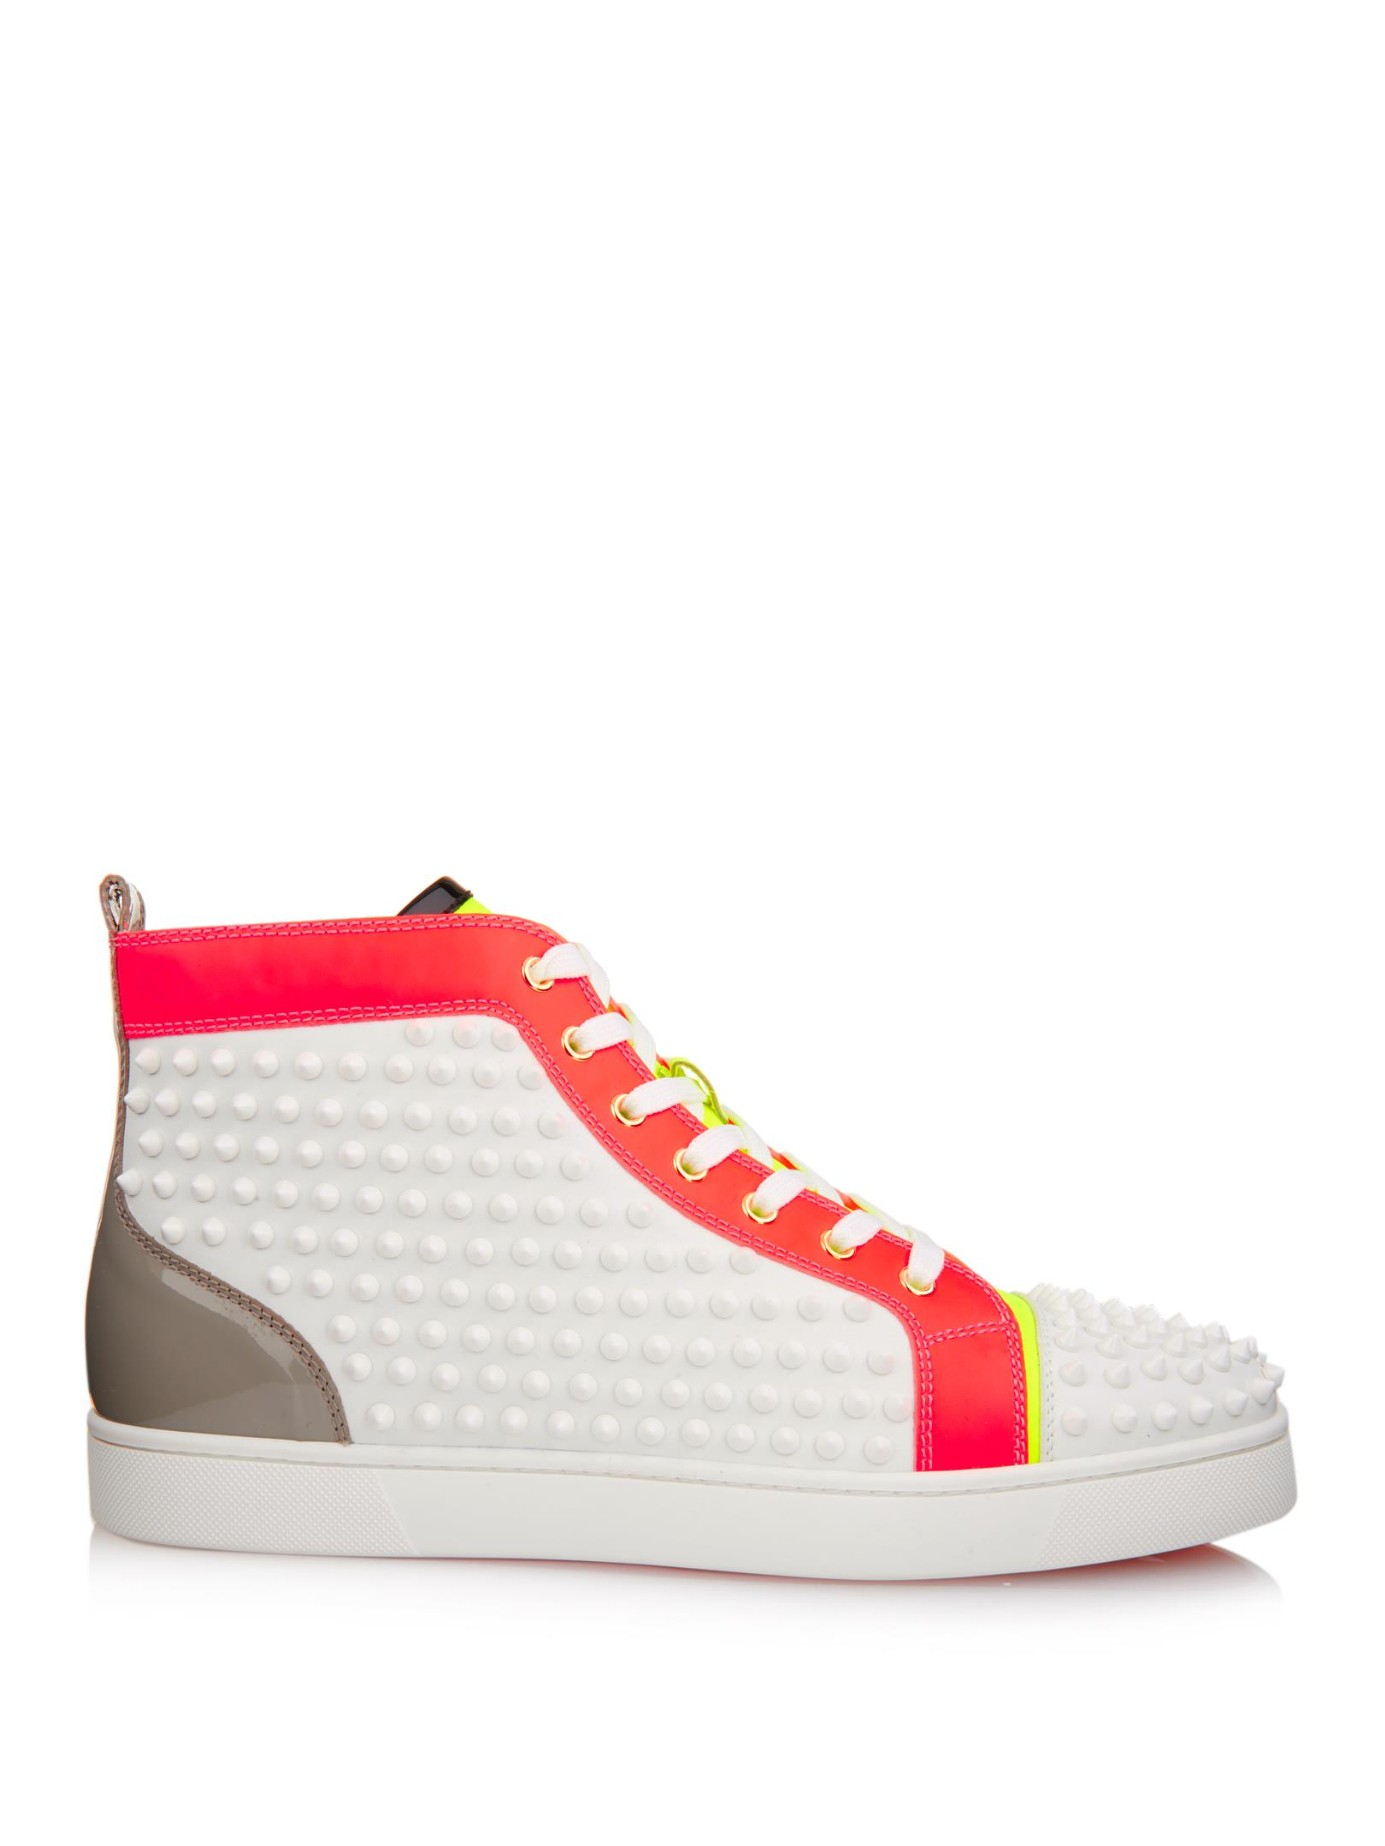 Christian louboutin Louis Spikes Leather High-Top Trainers in Red ...  